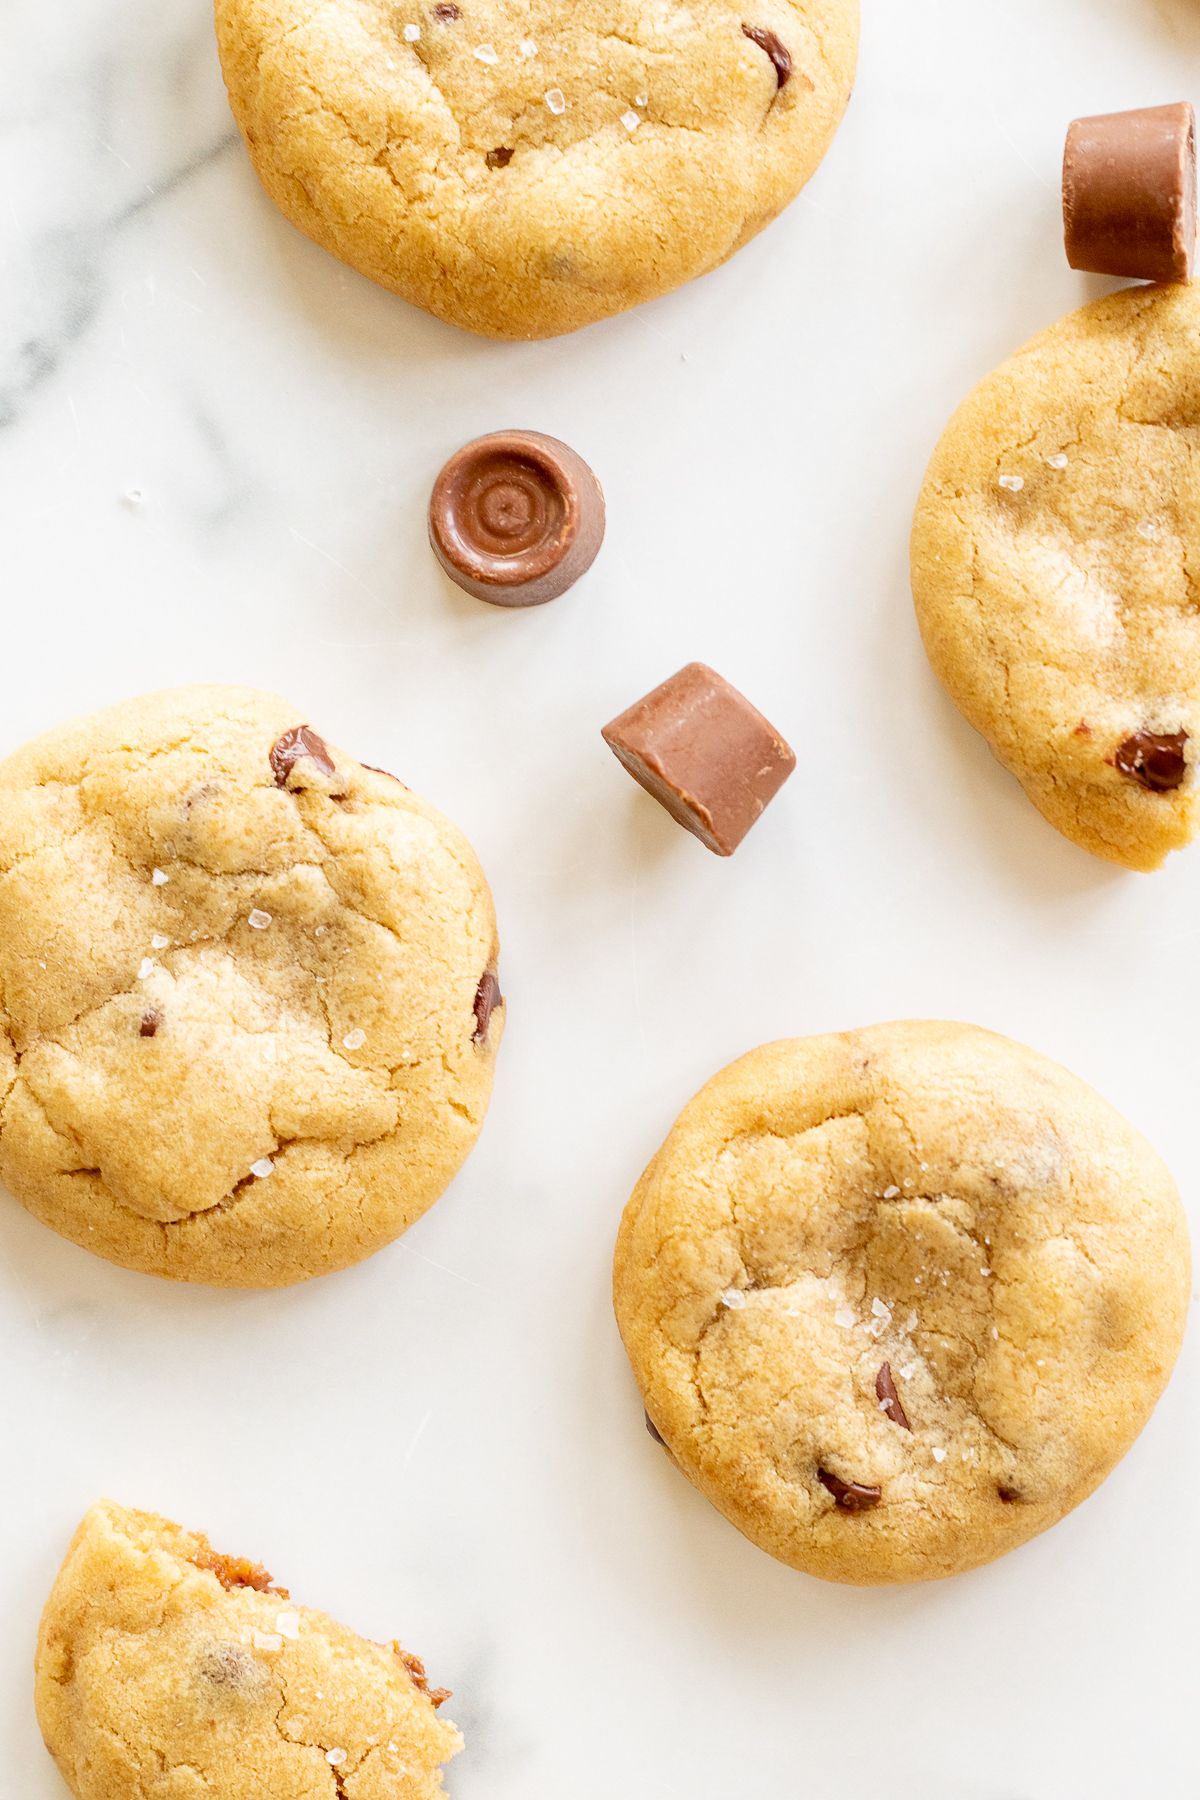 Salted caramel chocolate chip cookies on a marble countertop, surrounded by chocolate rolos.